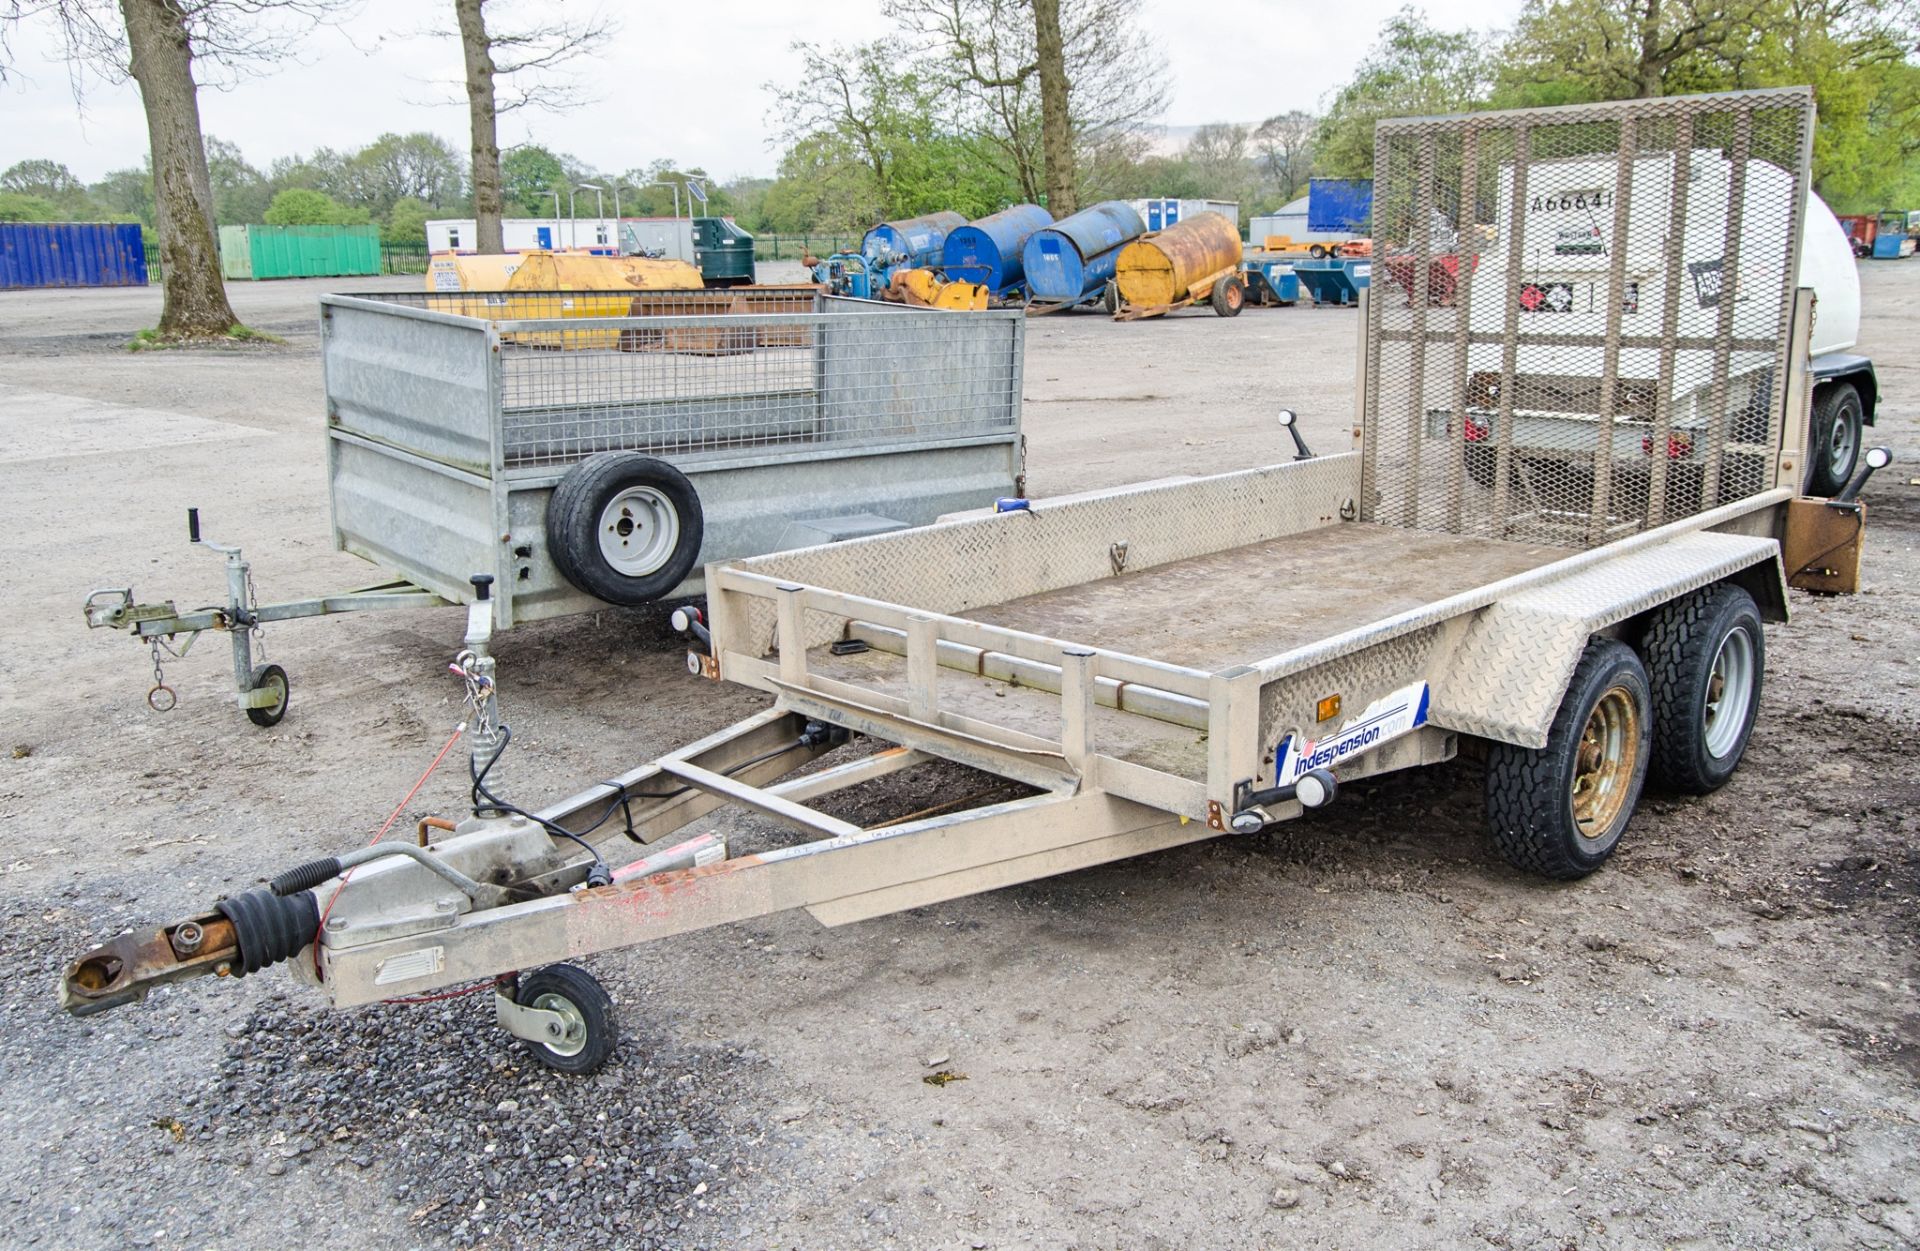 Indespension 10ft x 6ft tandem axle plant trailer S/N: 101857 A555814